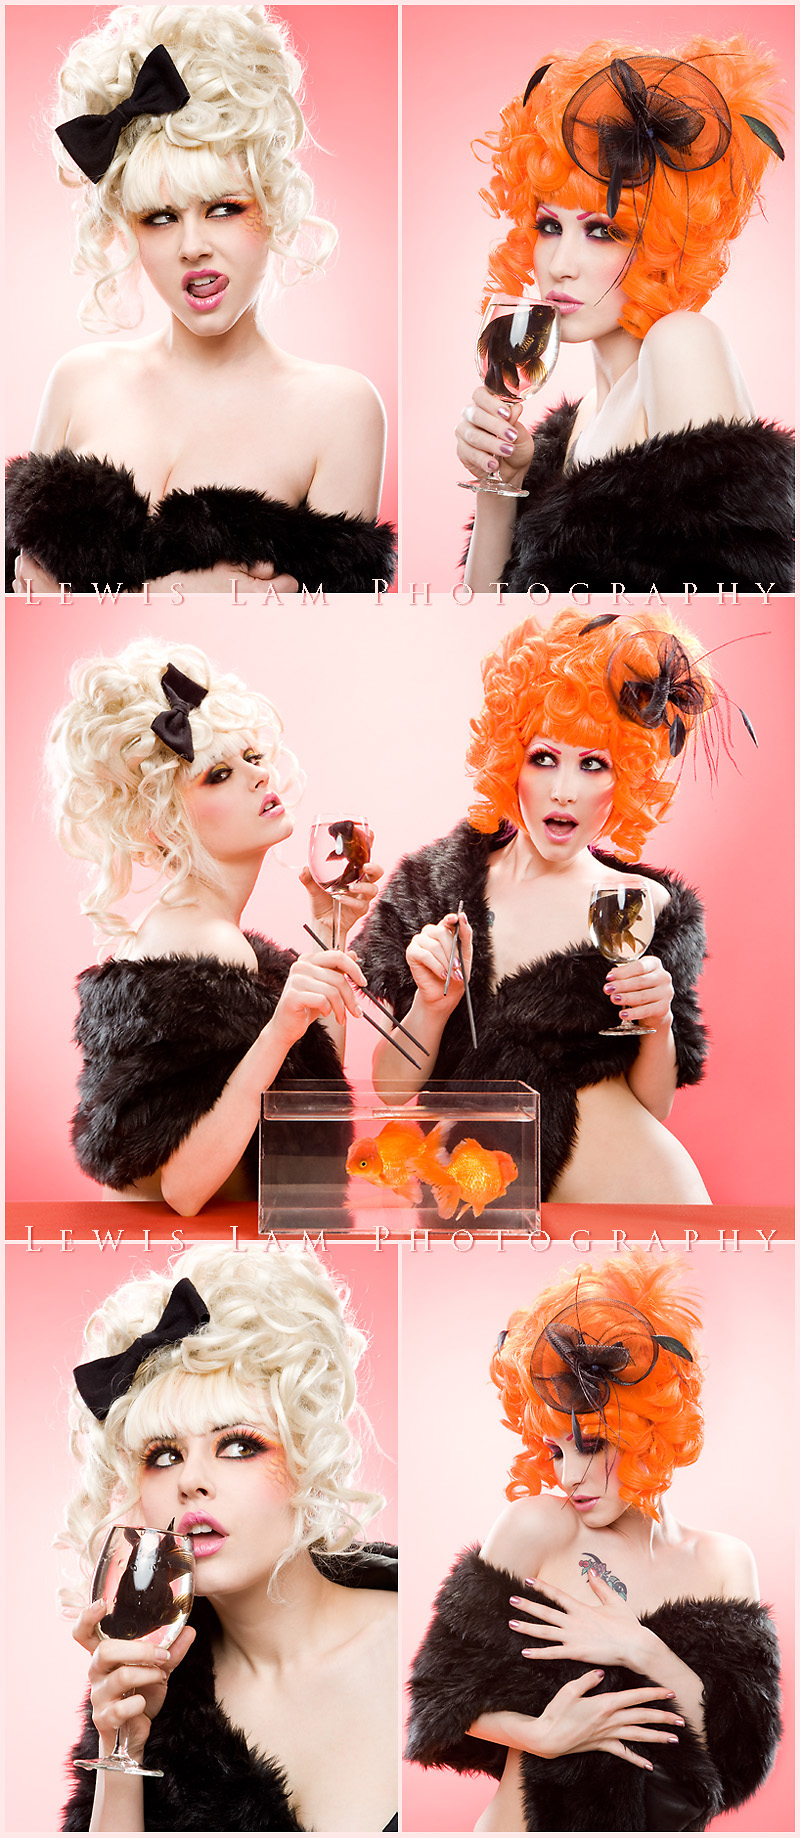 Female model photo shoot of --RYO-- and cake injection by Lewis Lam Photography in Hong Kong, makeup by Ryos_Makeup